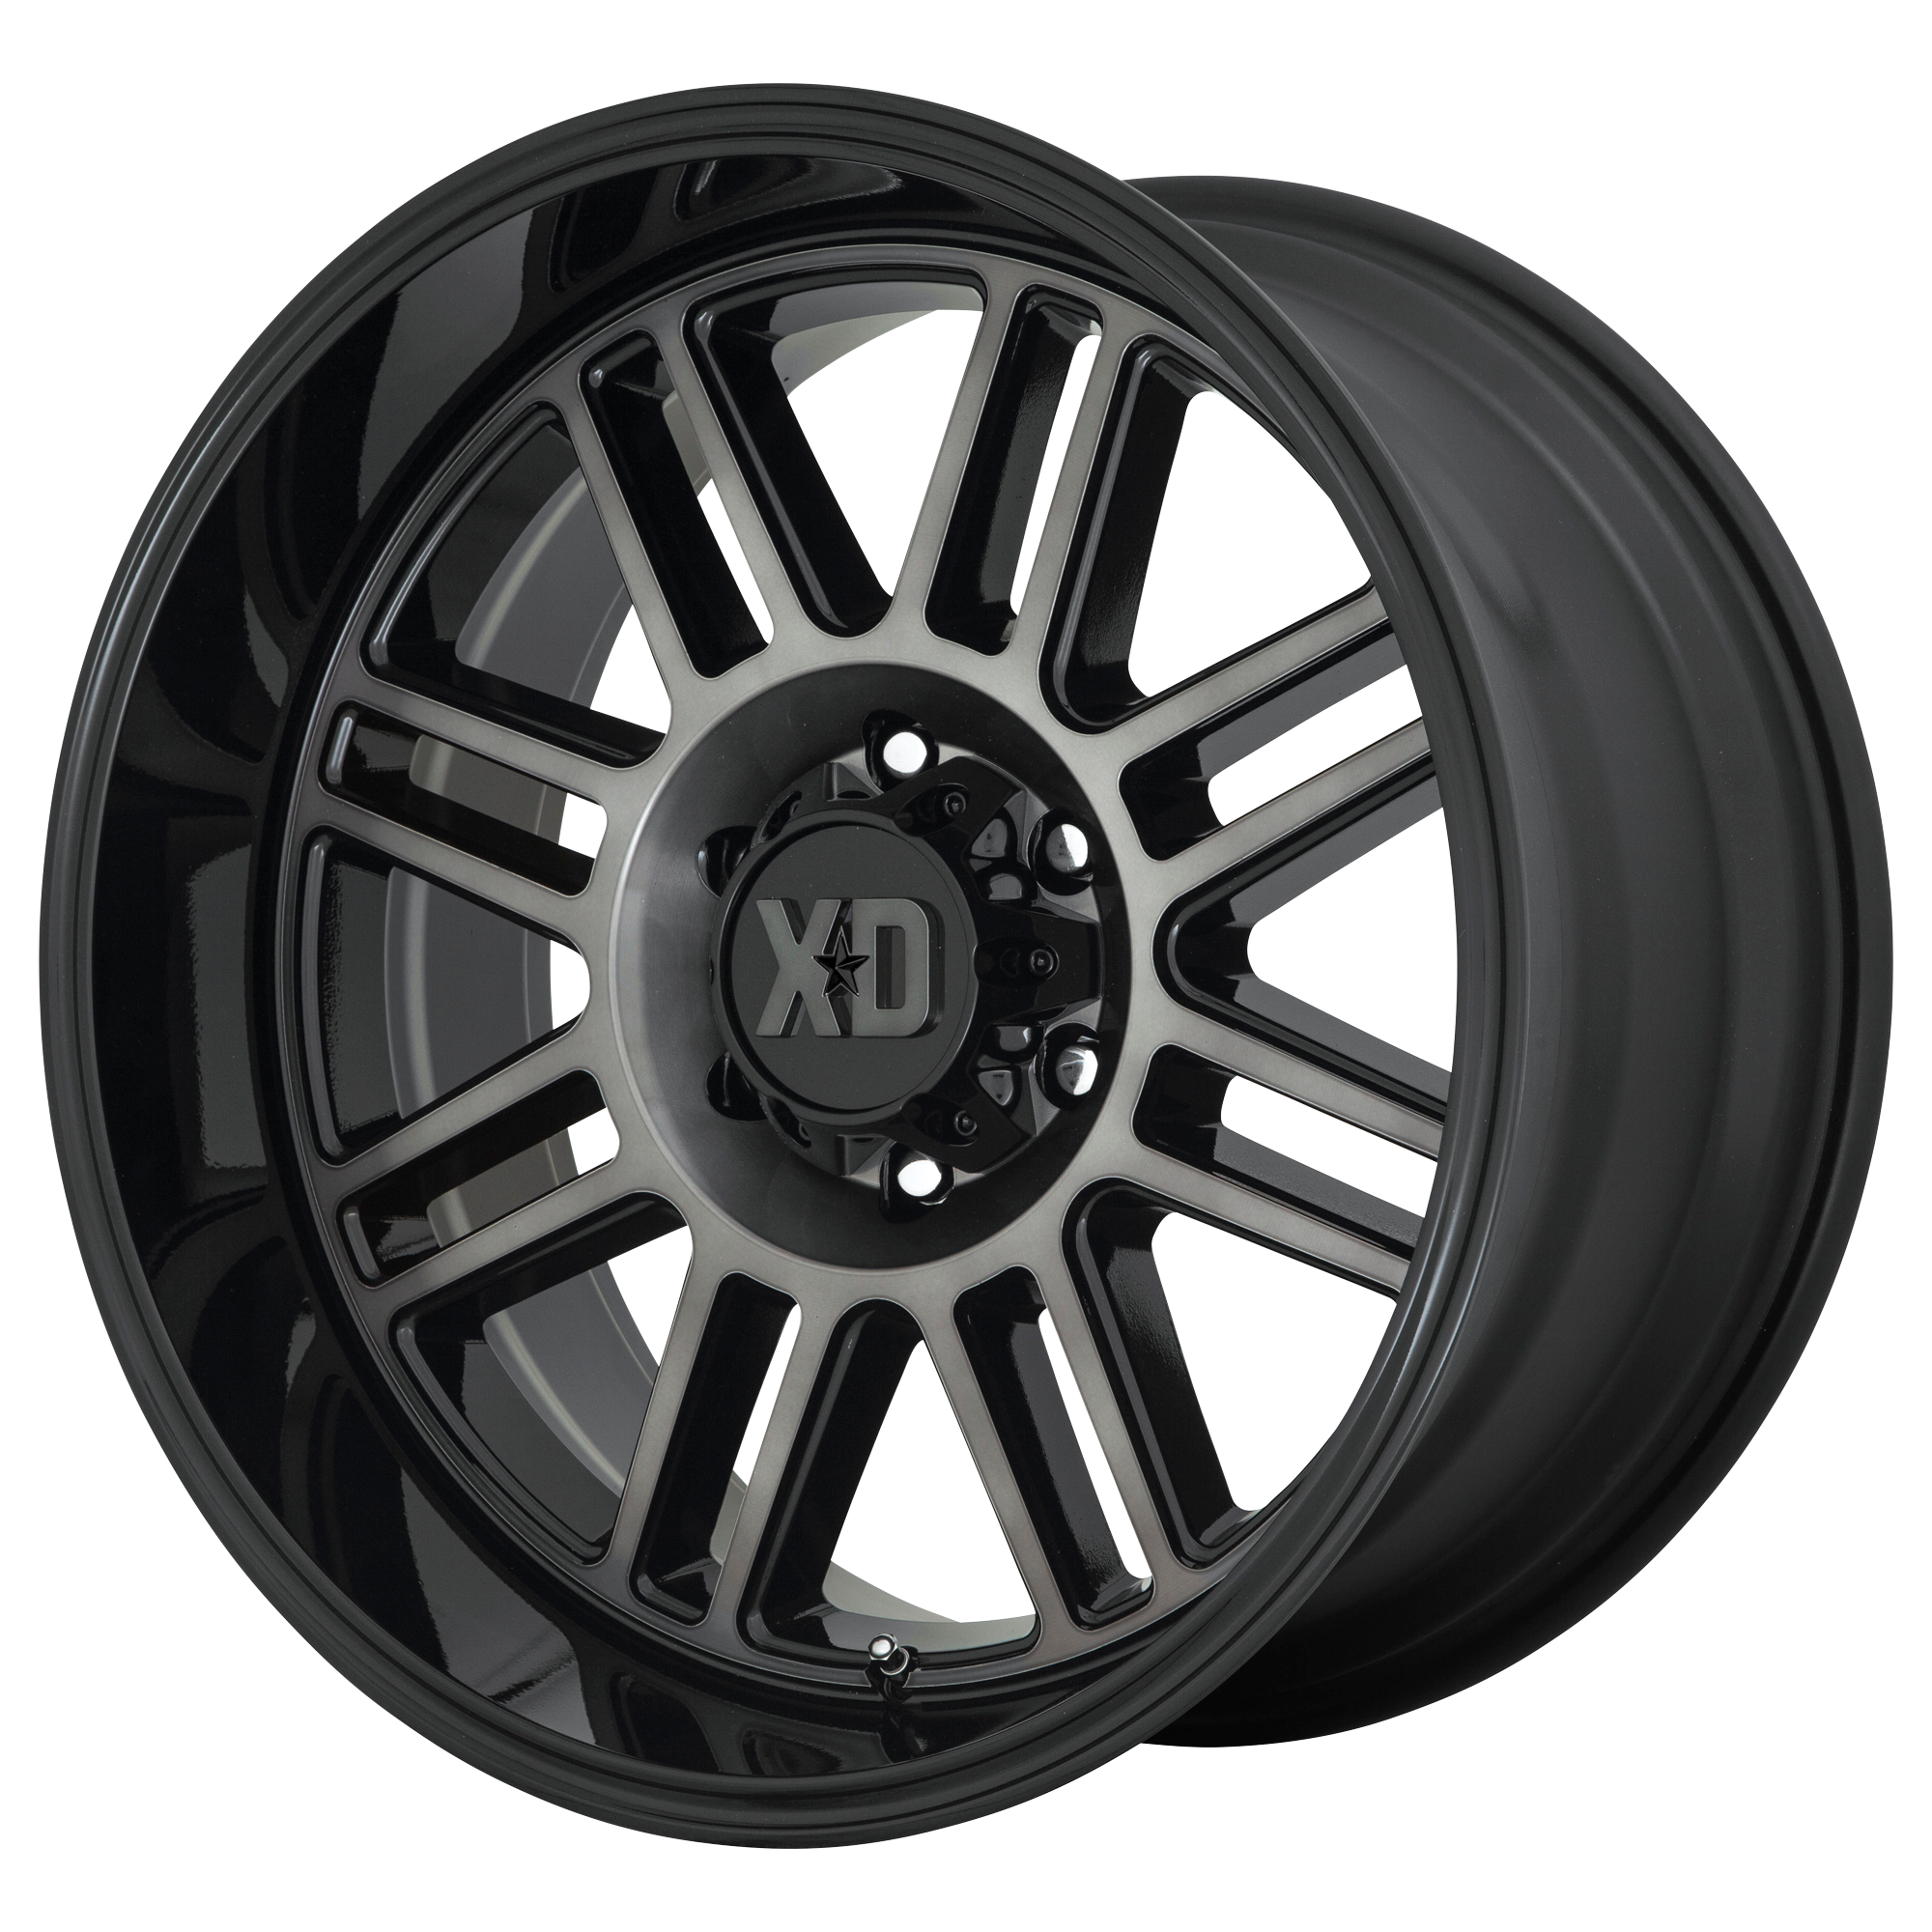 CAGE 20x9 8x170.00 GLOSS BLACK W/ GRAY TINT (18 mm) - Tires and Engine Performance